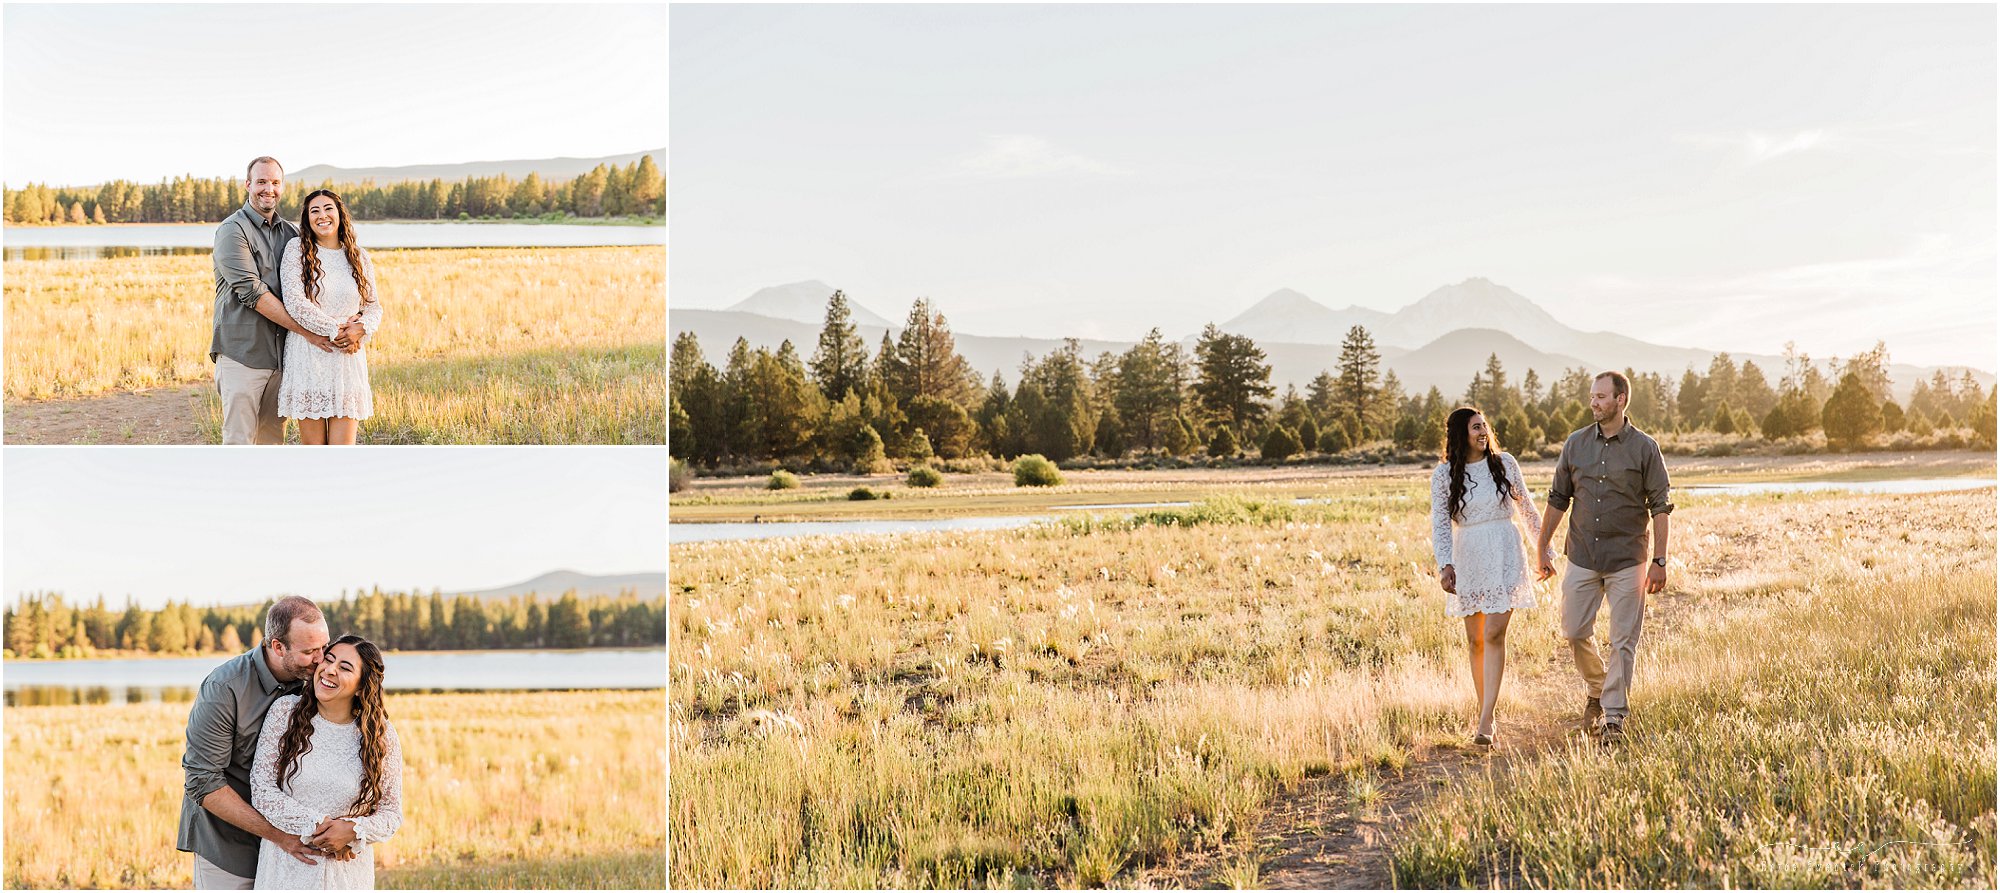 The High Desert of Central Oregon is an amazing place for your engagement photo session! | Erica Swantek Photography